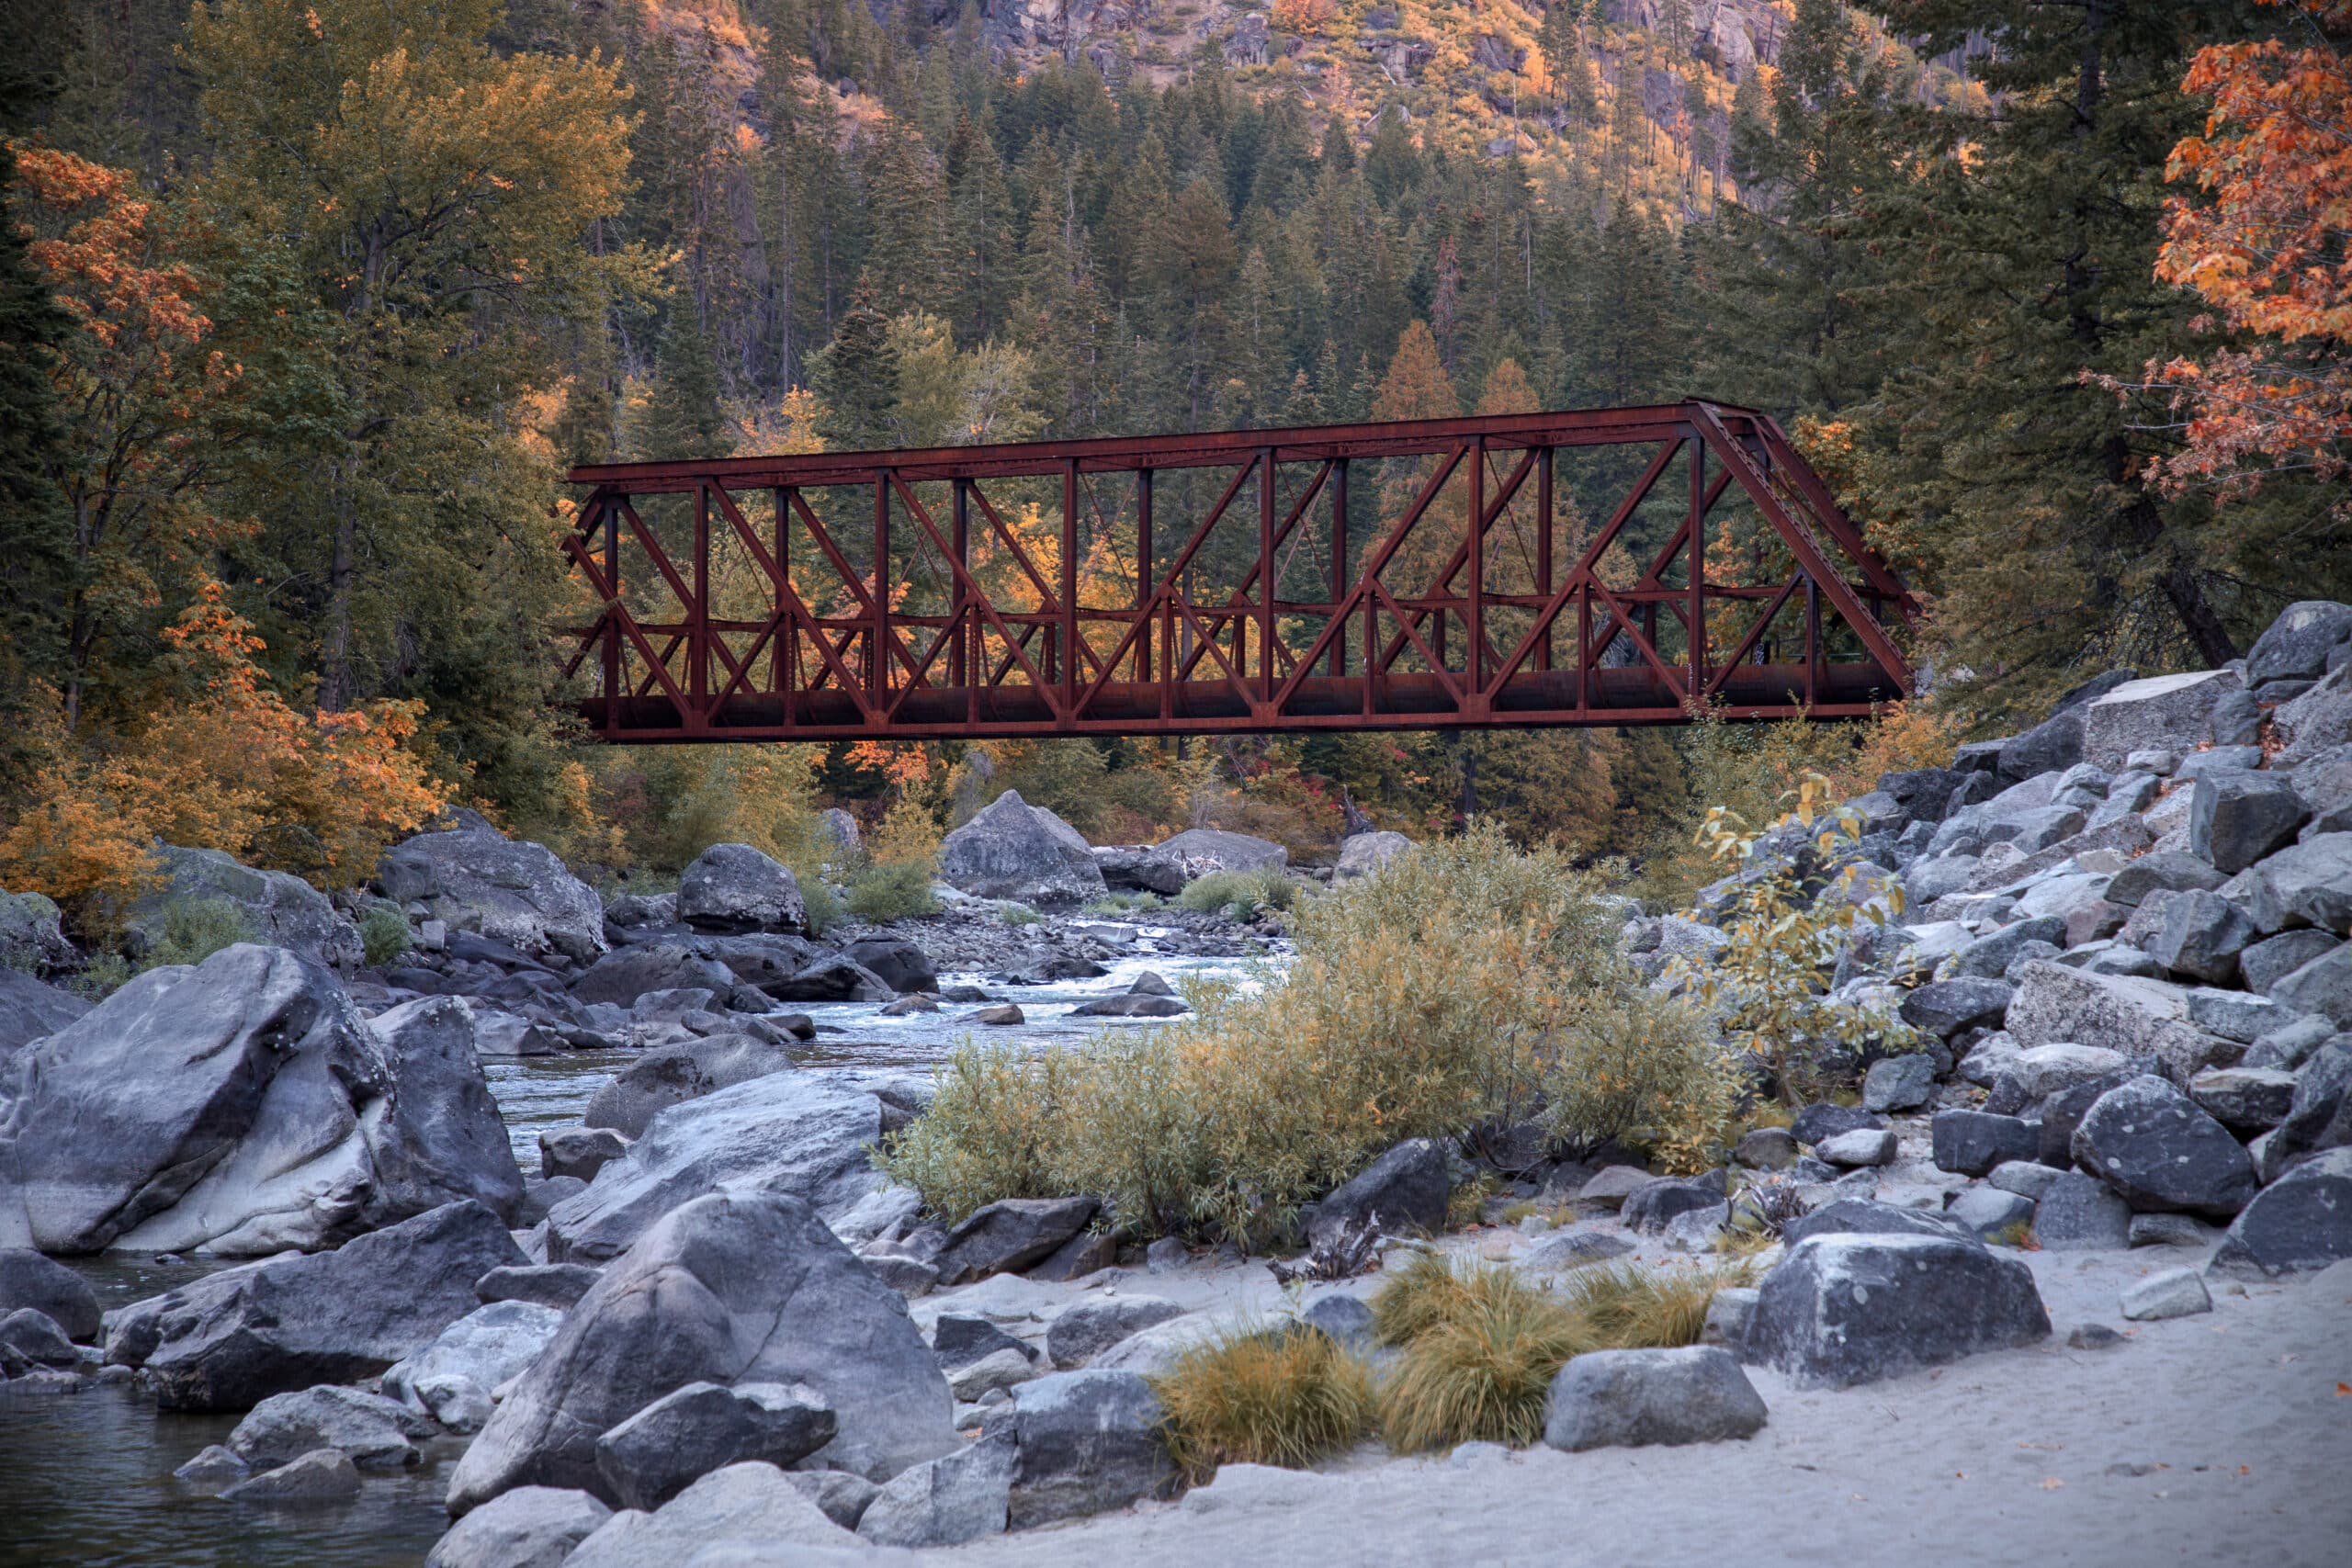 Train,Tressel,Over,The,Wenatchee,River,In,The,Cascade,Mountains,